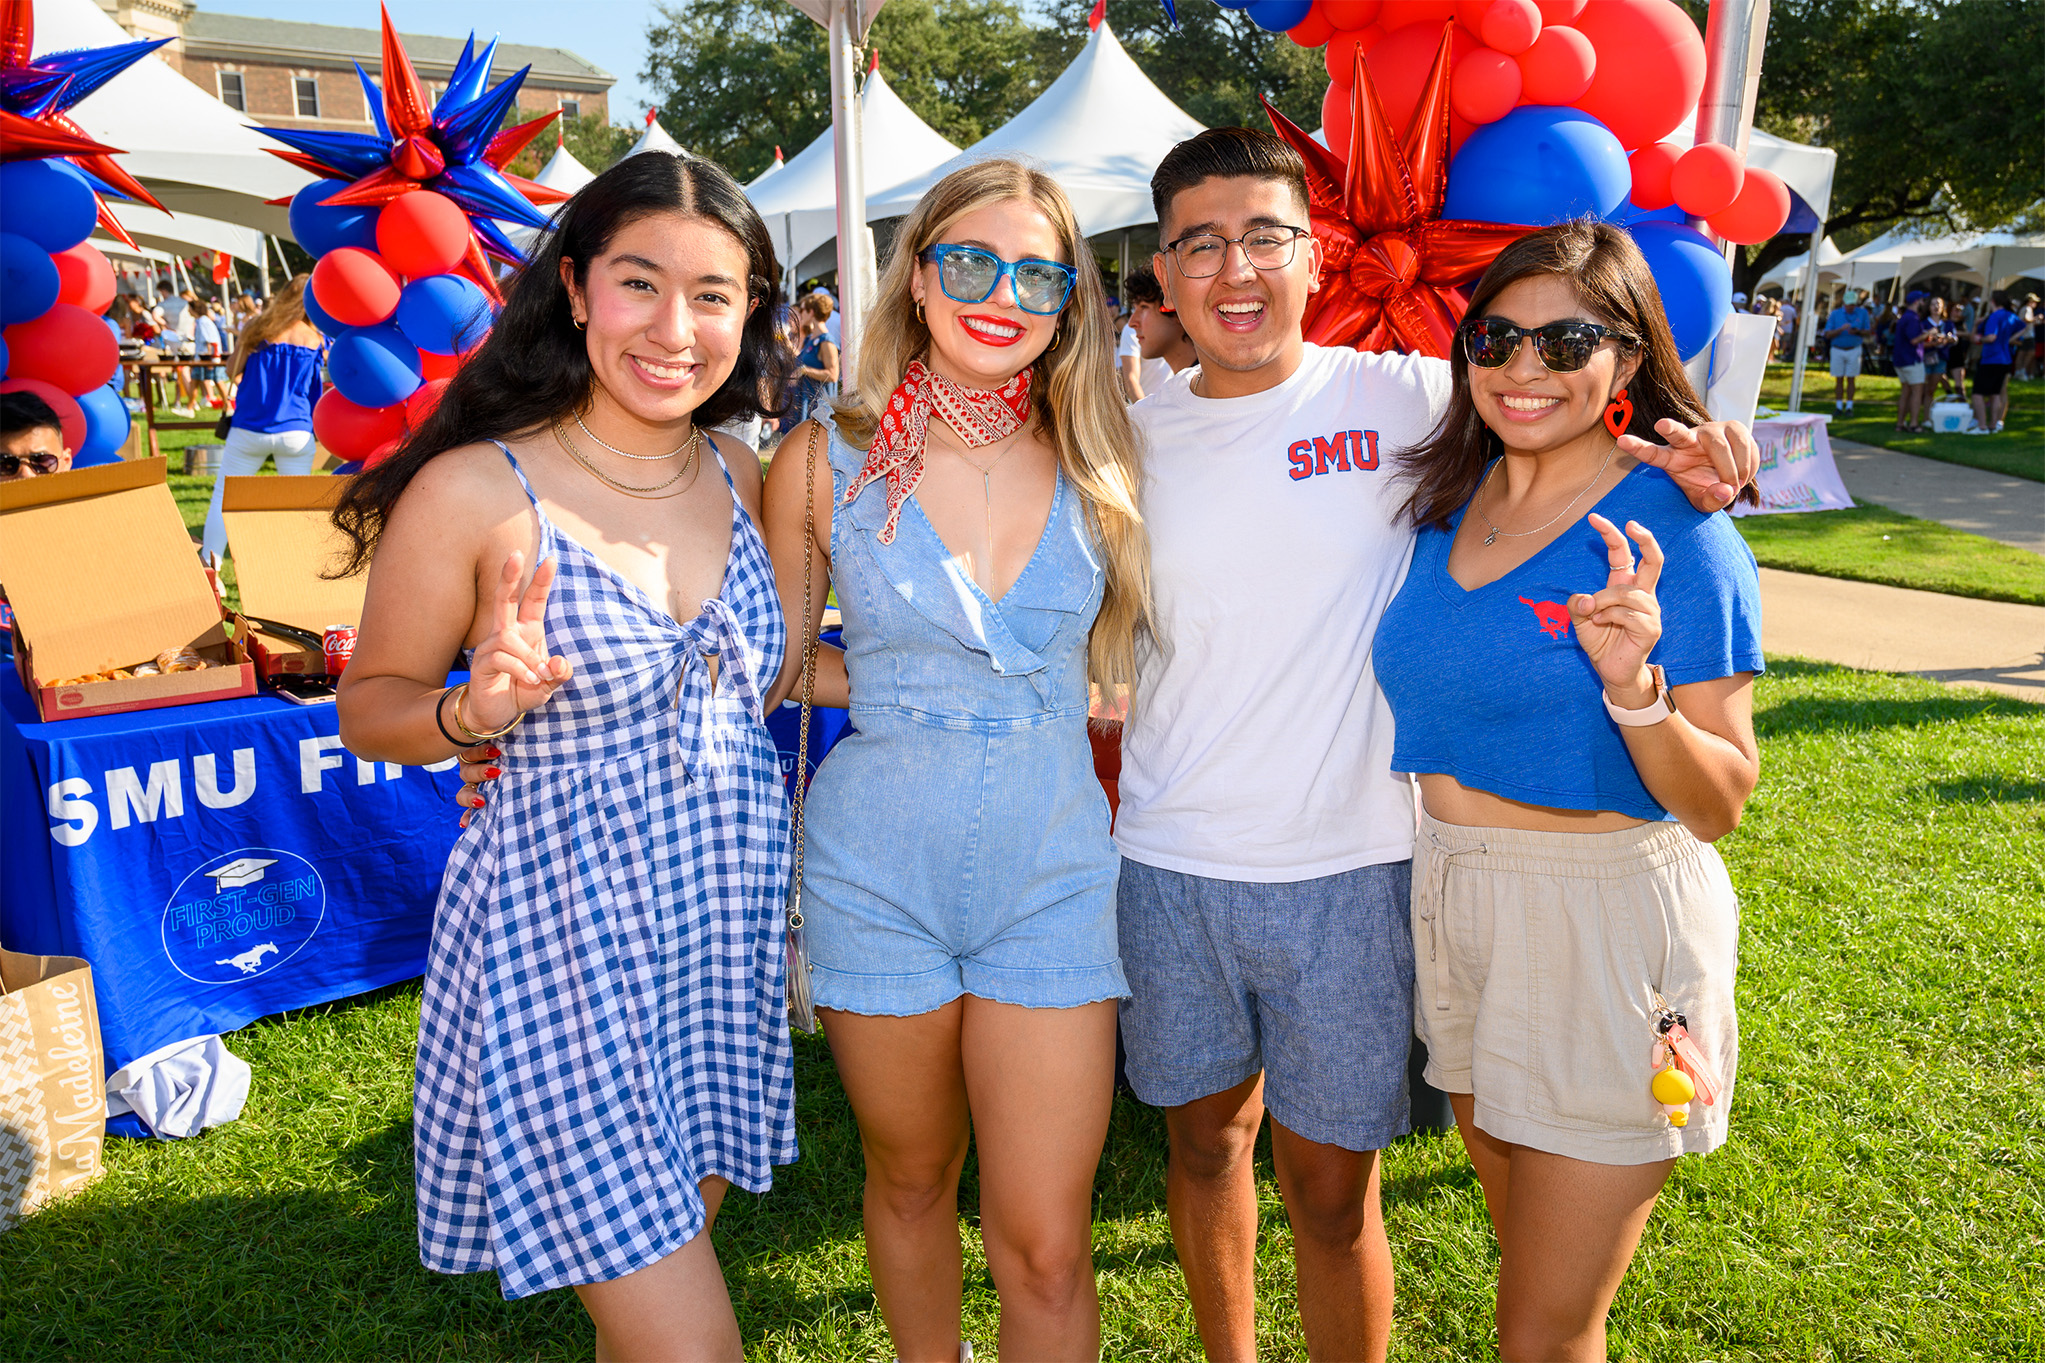 four students outside standing in front of a table and balloons at an outdoor event